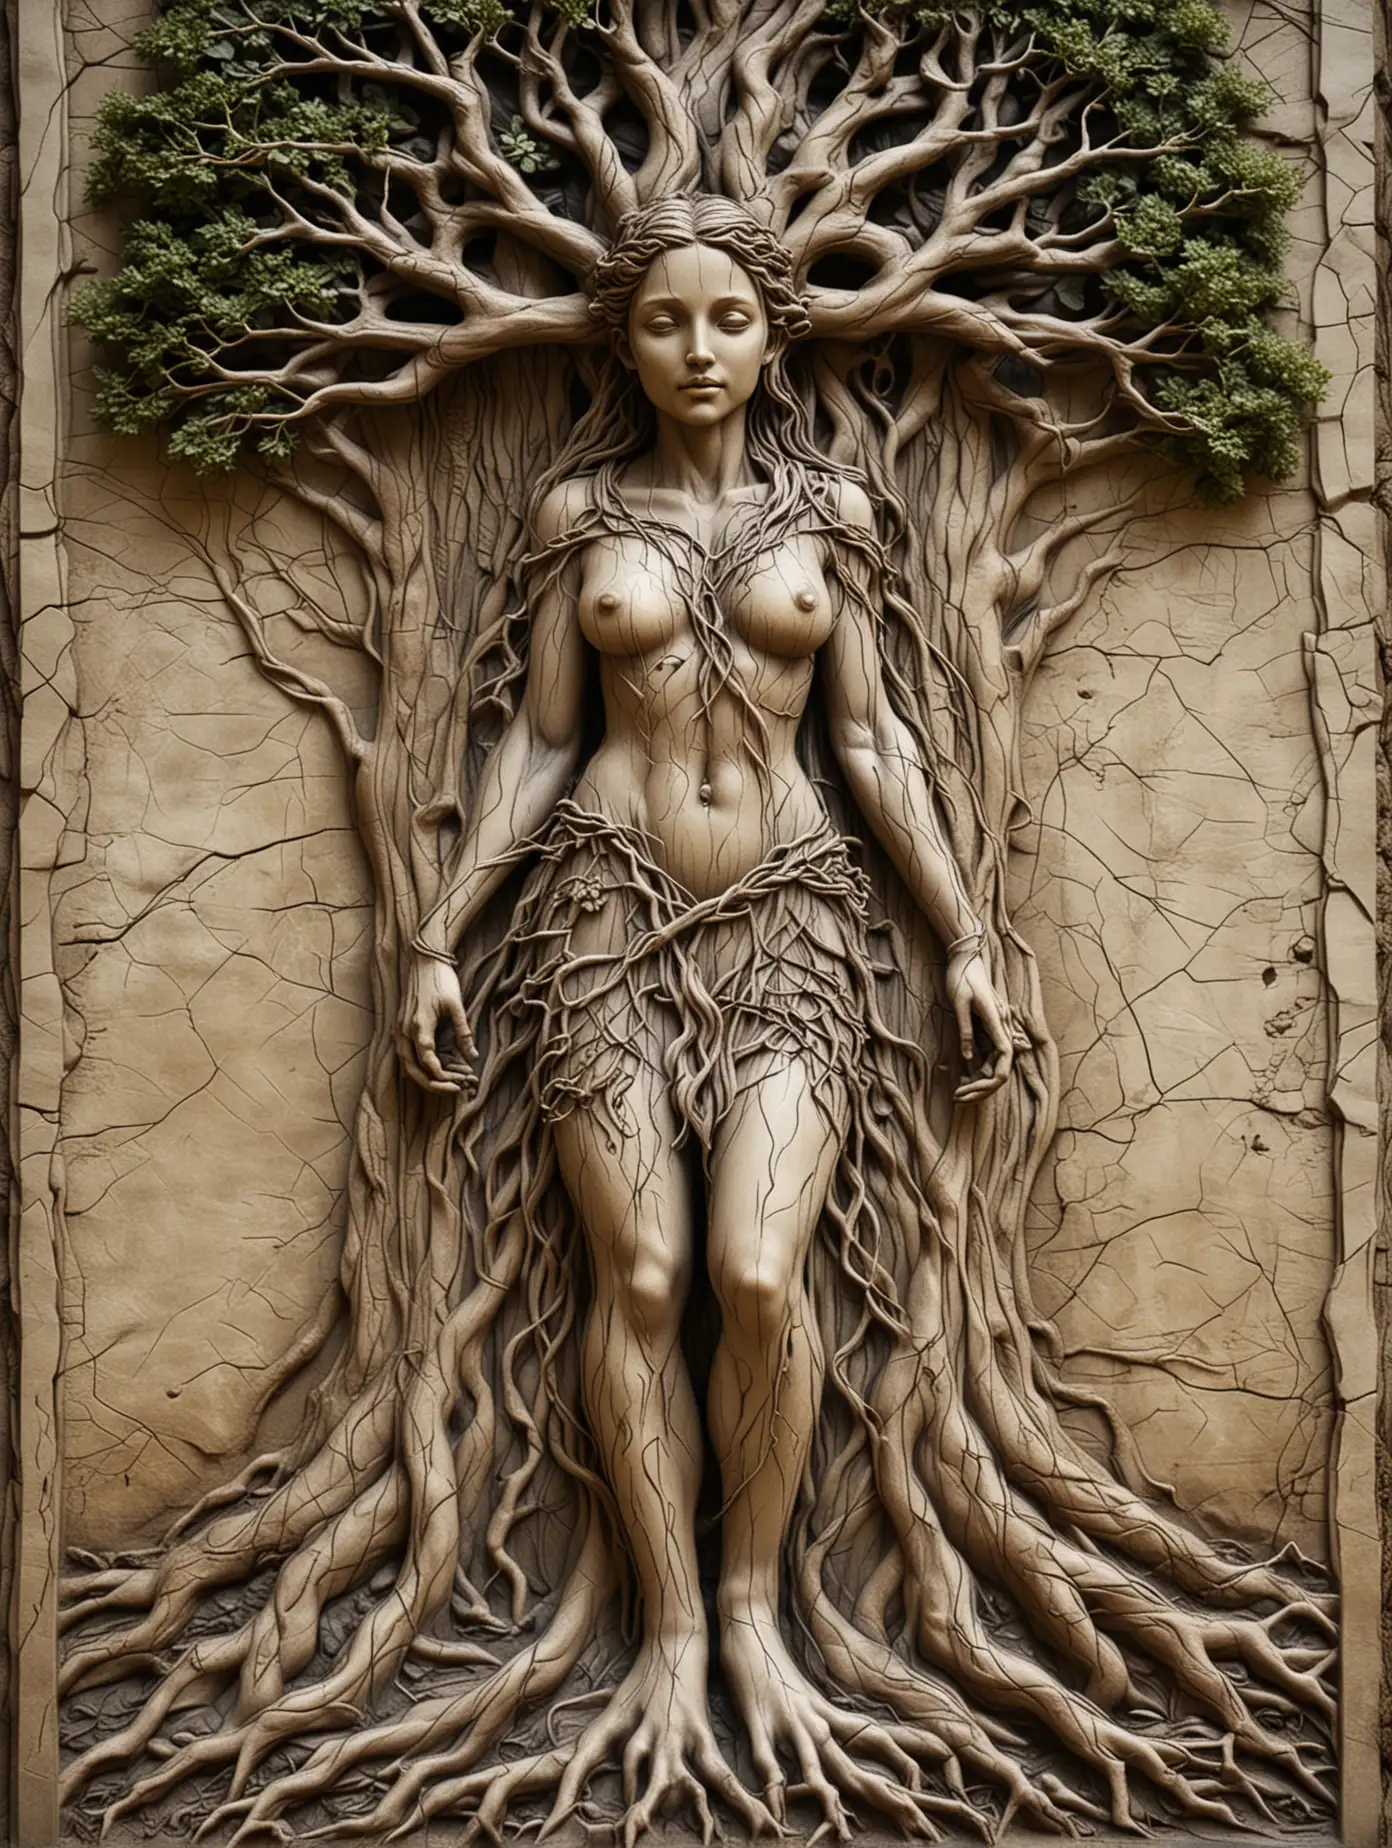 Druid-Girl-Embraced-by-Entwining-Tree-Roots-BasRelief-Art